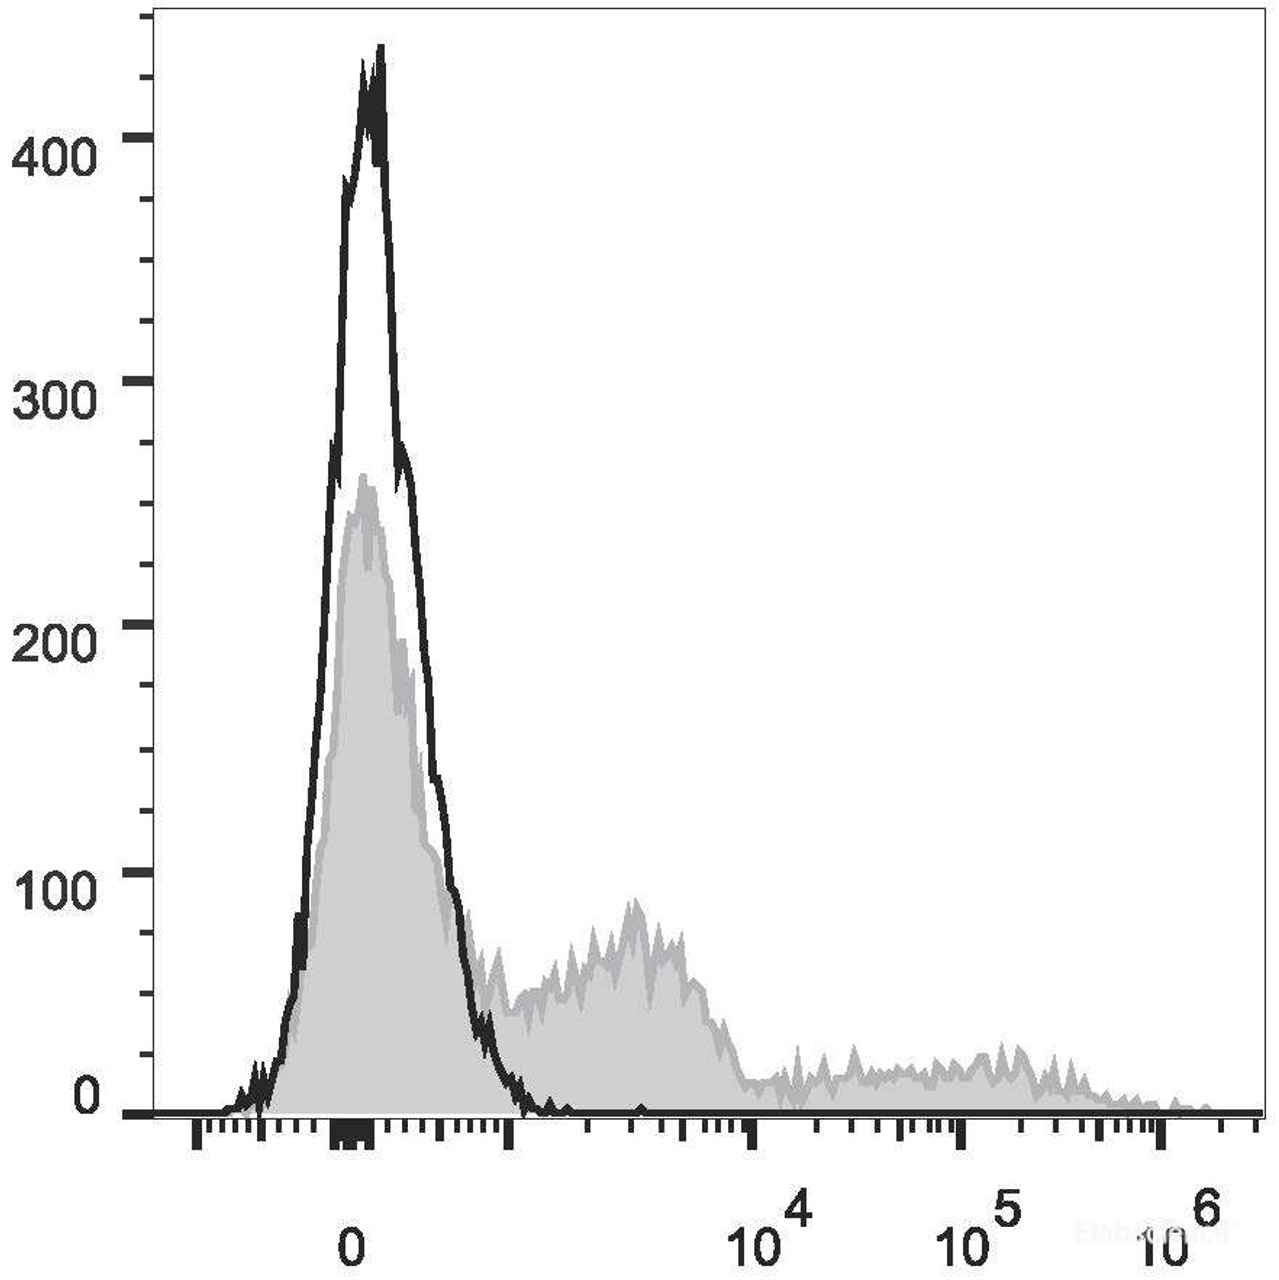 C57BL/6 murine bone marrow cells are stained with PE/Cyanine7 Anti-Mouse Ly-6G/Ly-6C (Gr-1) Antibody[Used at .2 μg/1<sup>6</sup> cells dilution](filled gray histogram). Unstained bone marrow cells (empty black histogram) are used as control.